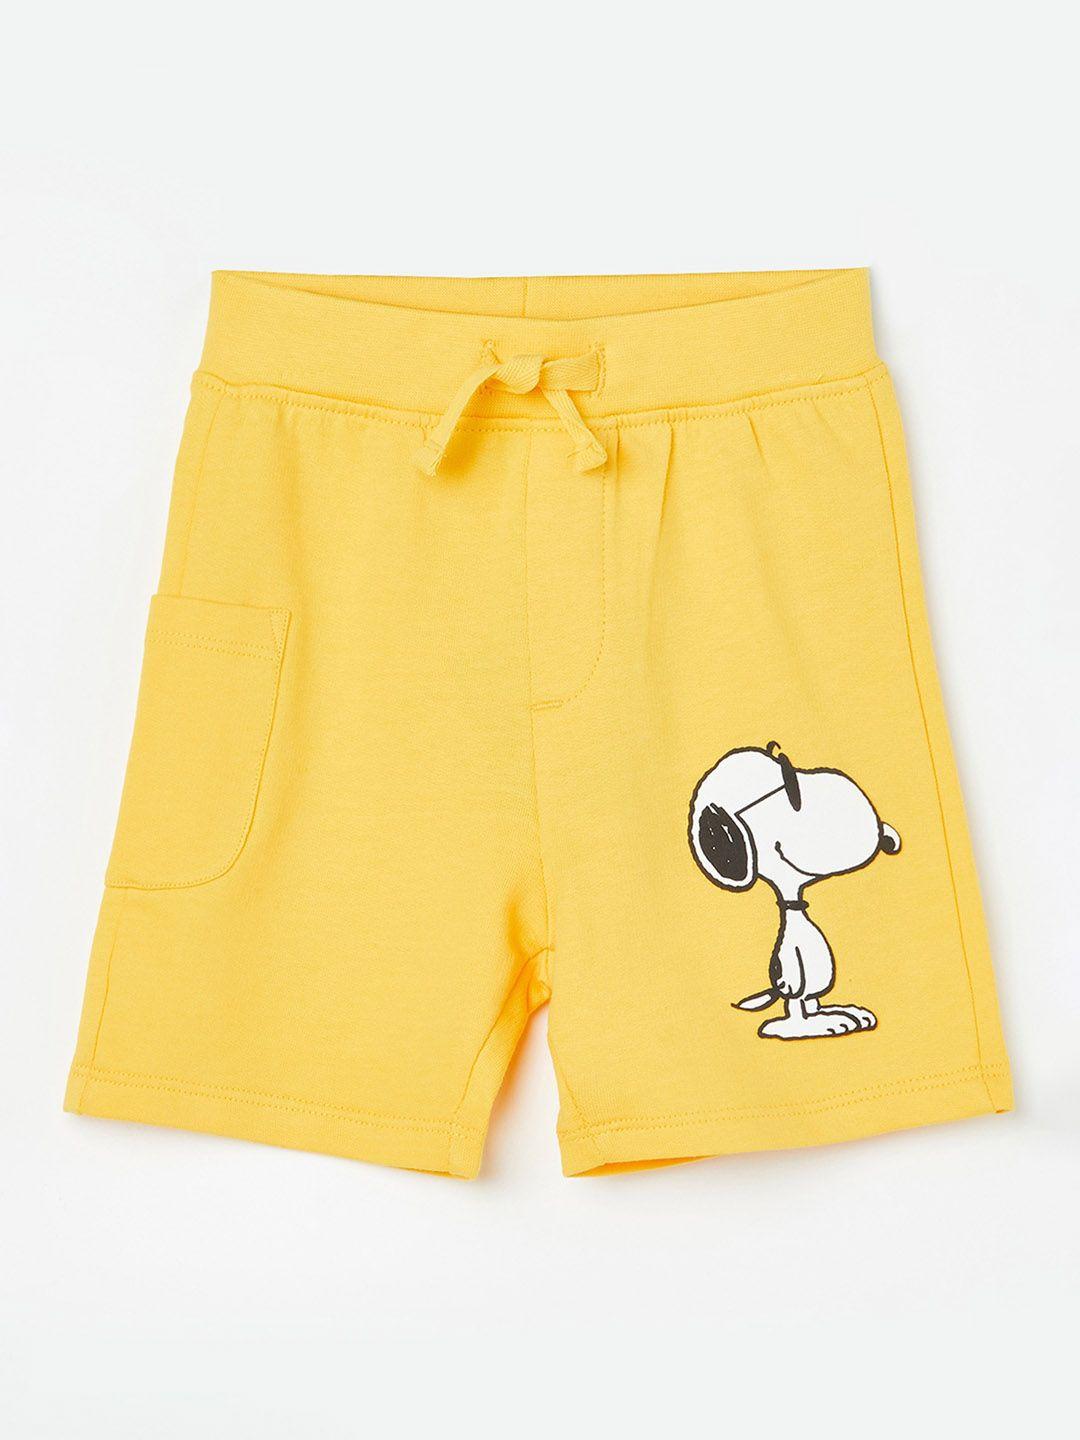 juniors-by-lifestyle-boys-snoopy-printed-pure-cotton-shorts